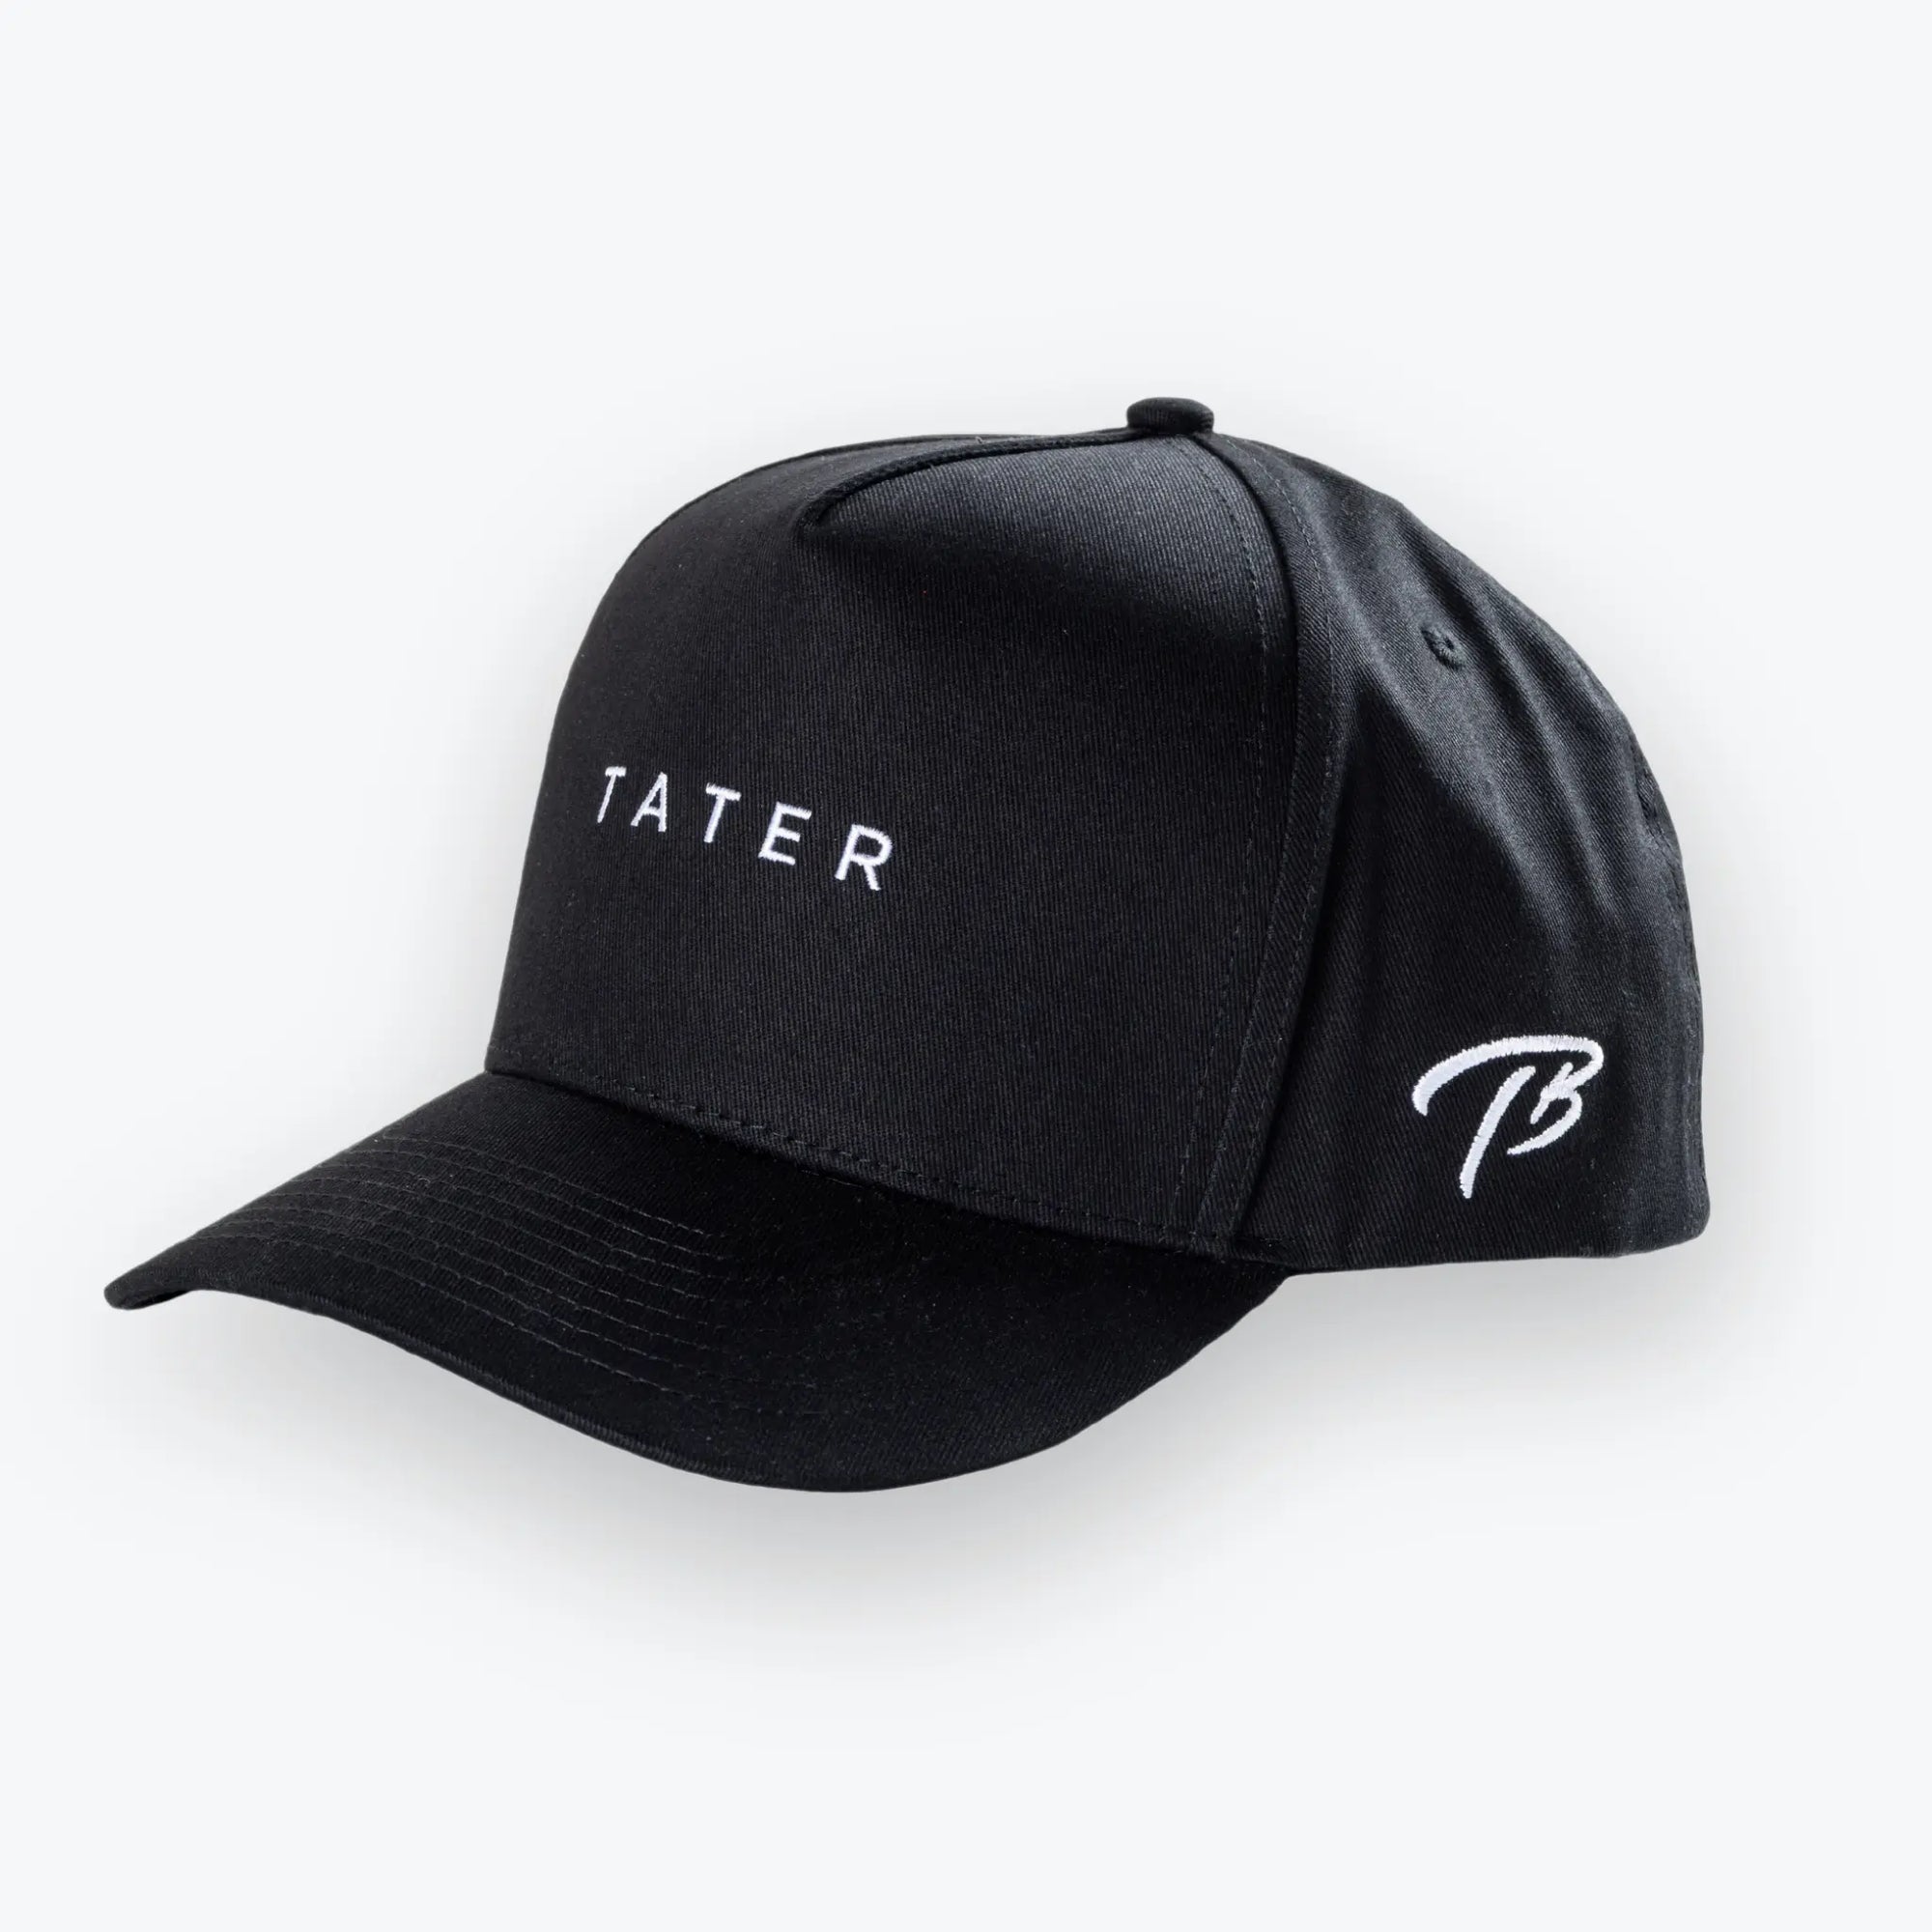 The image features a black snapback hat with the word "TATER" embroidered in white on the front, signifying the Tater Baseball brand. The side of the cap also has the Tater Baseball logo, which appears to be a stylized "TB" in white thread. The hat's design is minimalistic and contemporary, likely appealing to a wide range of customers, both within the baseball community and those interested in casual athletic wear.